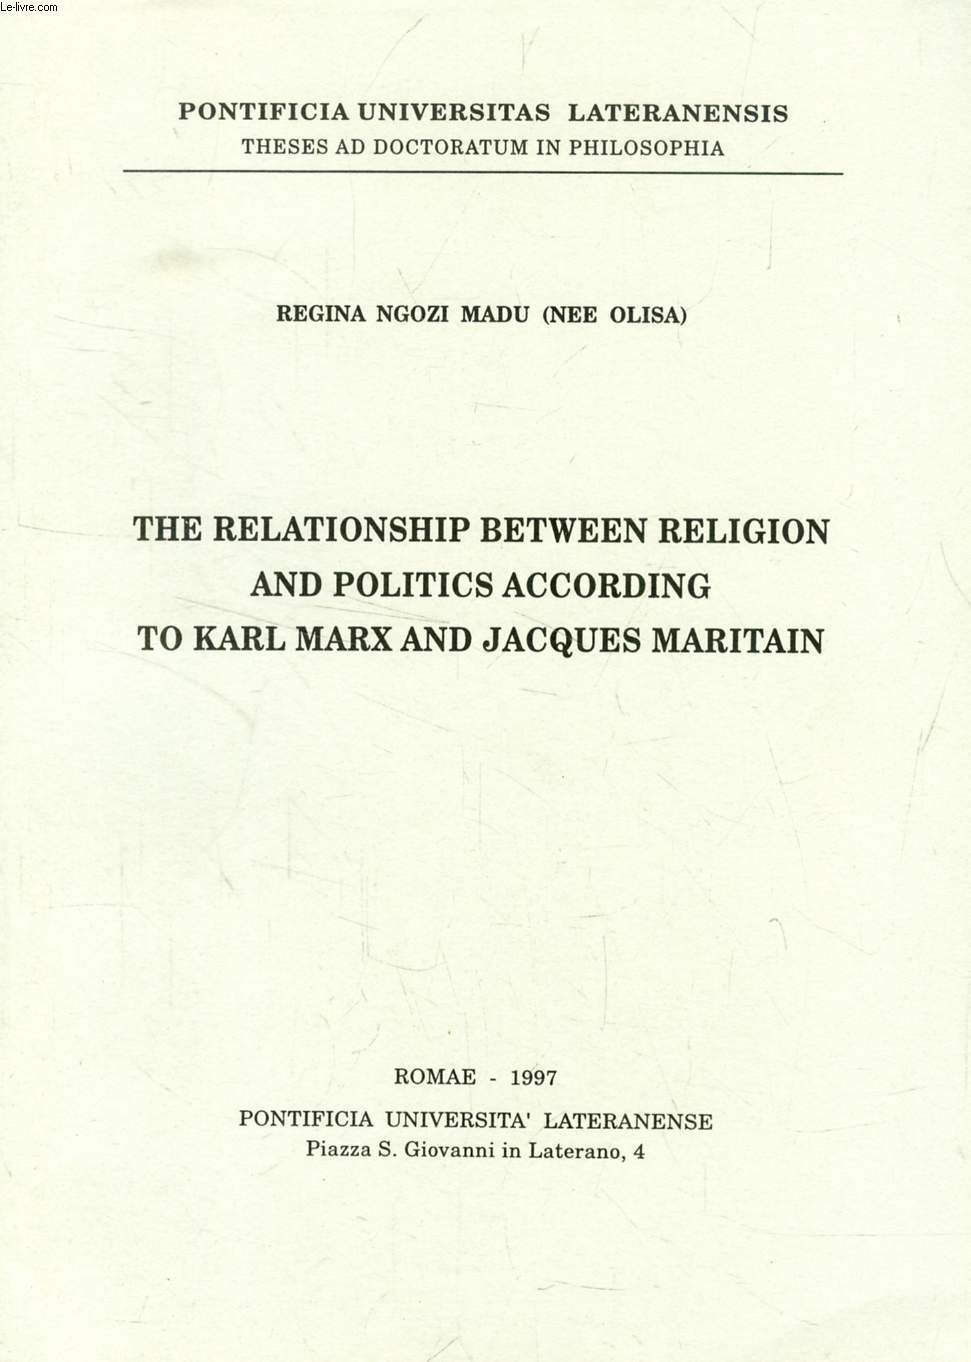 THE RELATIONSHIP BETWEEN RELIGION AND POLITICS ACCORDING TO KARL MARX AND JACQUES MARITAIN